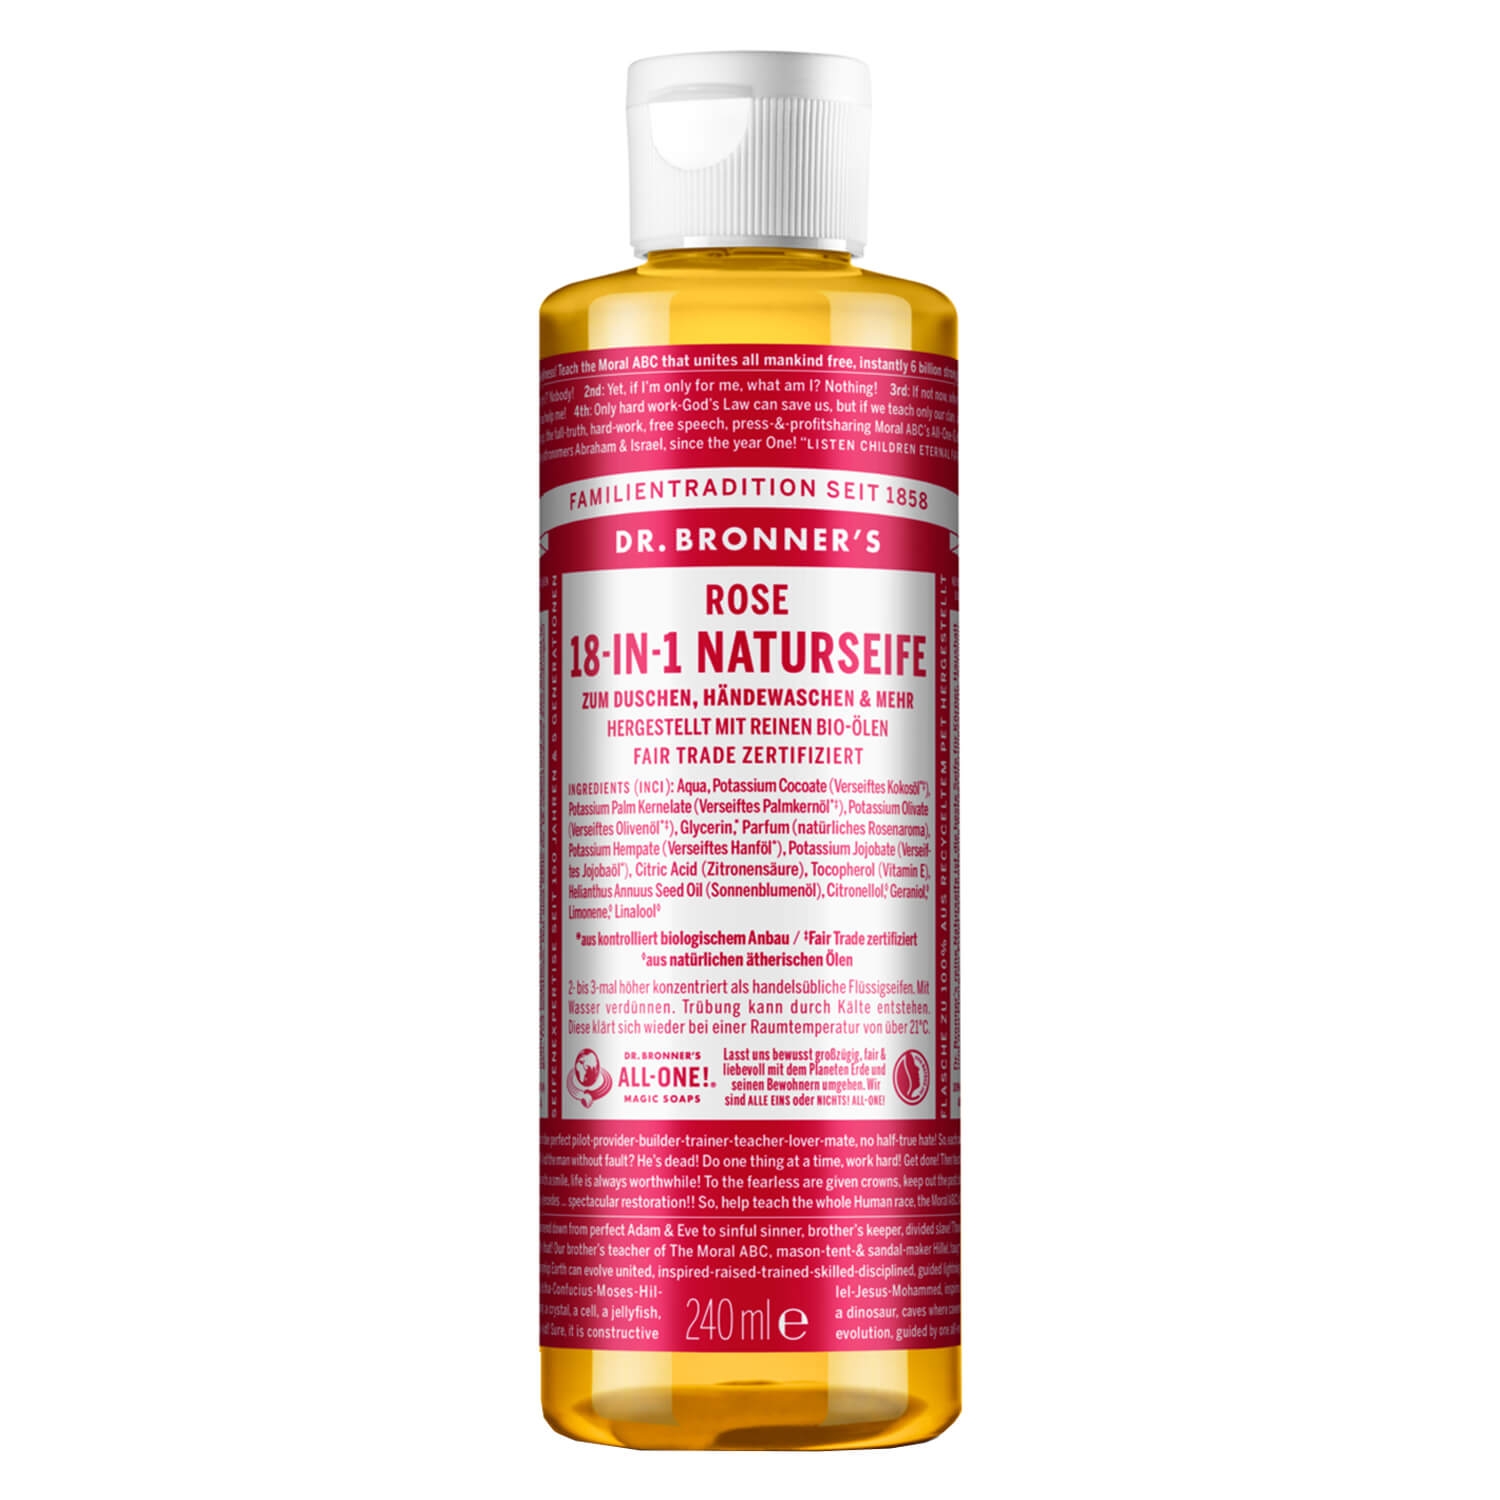 Product image from DR. BRONNER'S - 18-IN-1 Flüssigseife Rose